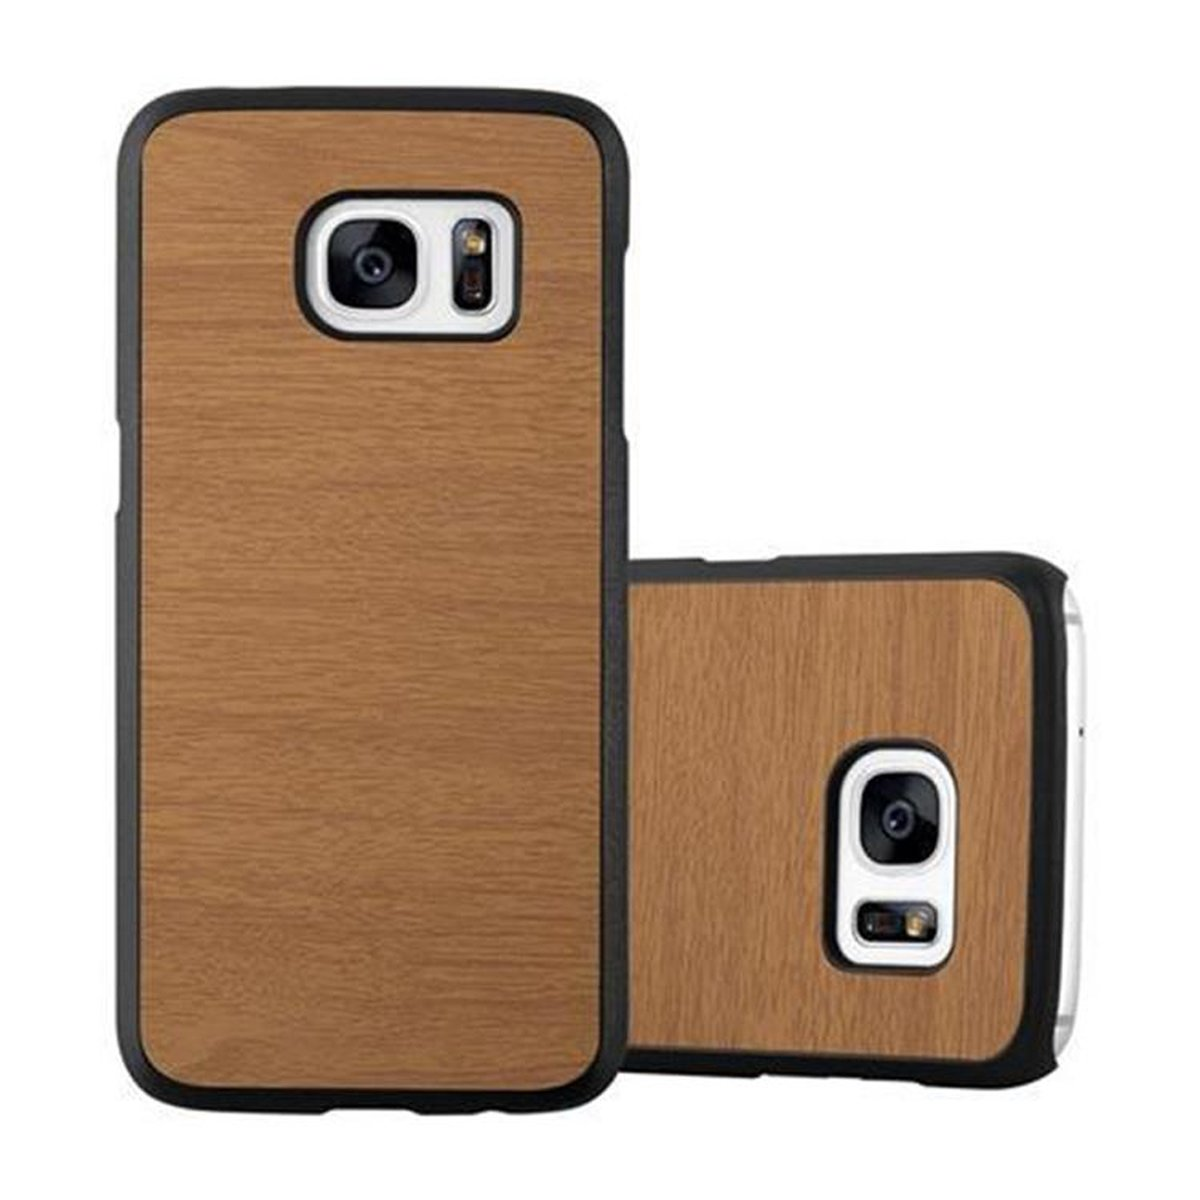 CADORABO Woody Style, WOODY Hard Samsung, Backcover, S7, BRAUN Hülle Case Galaxy